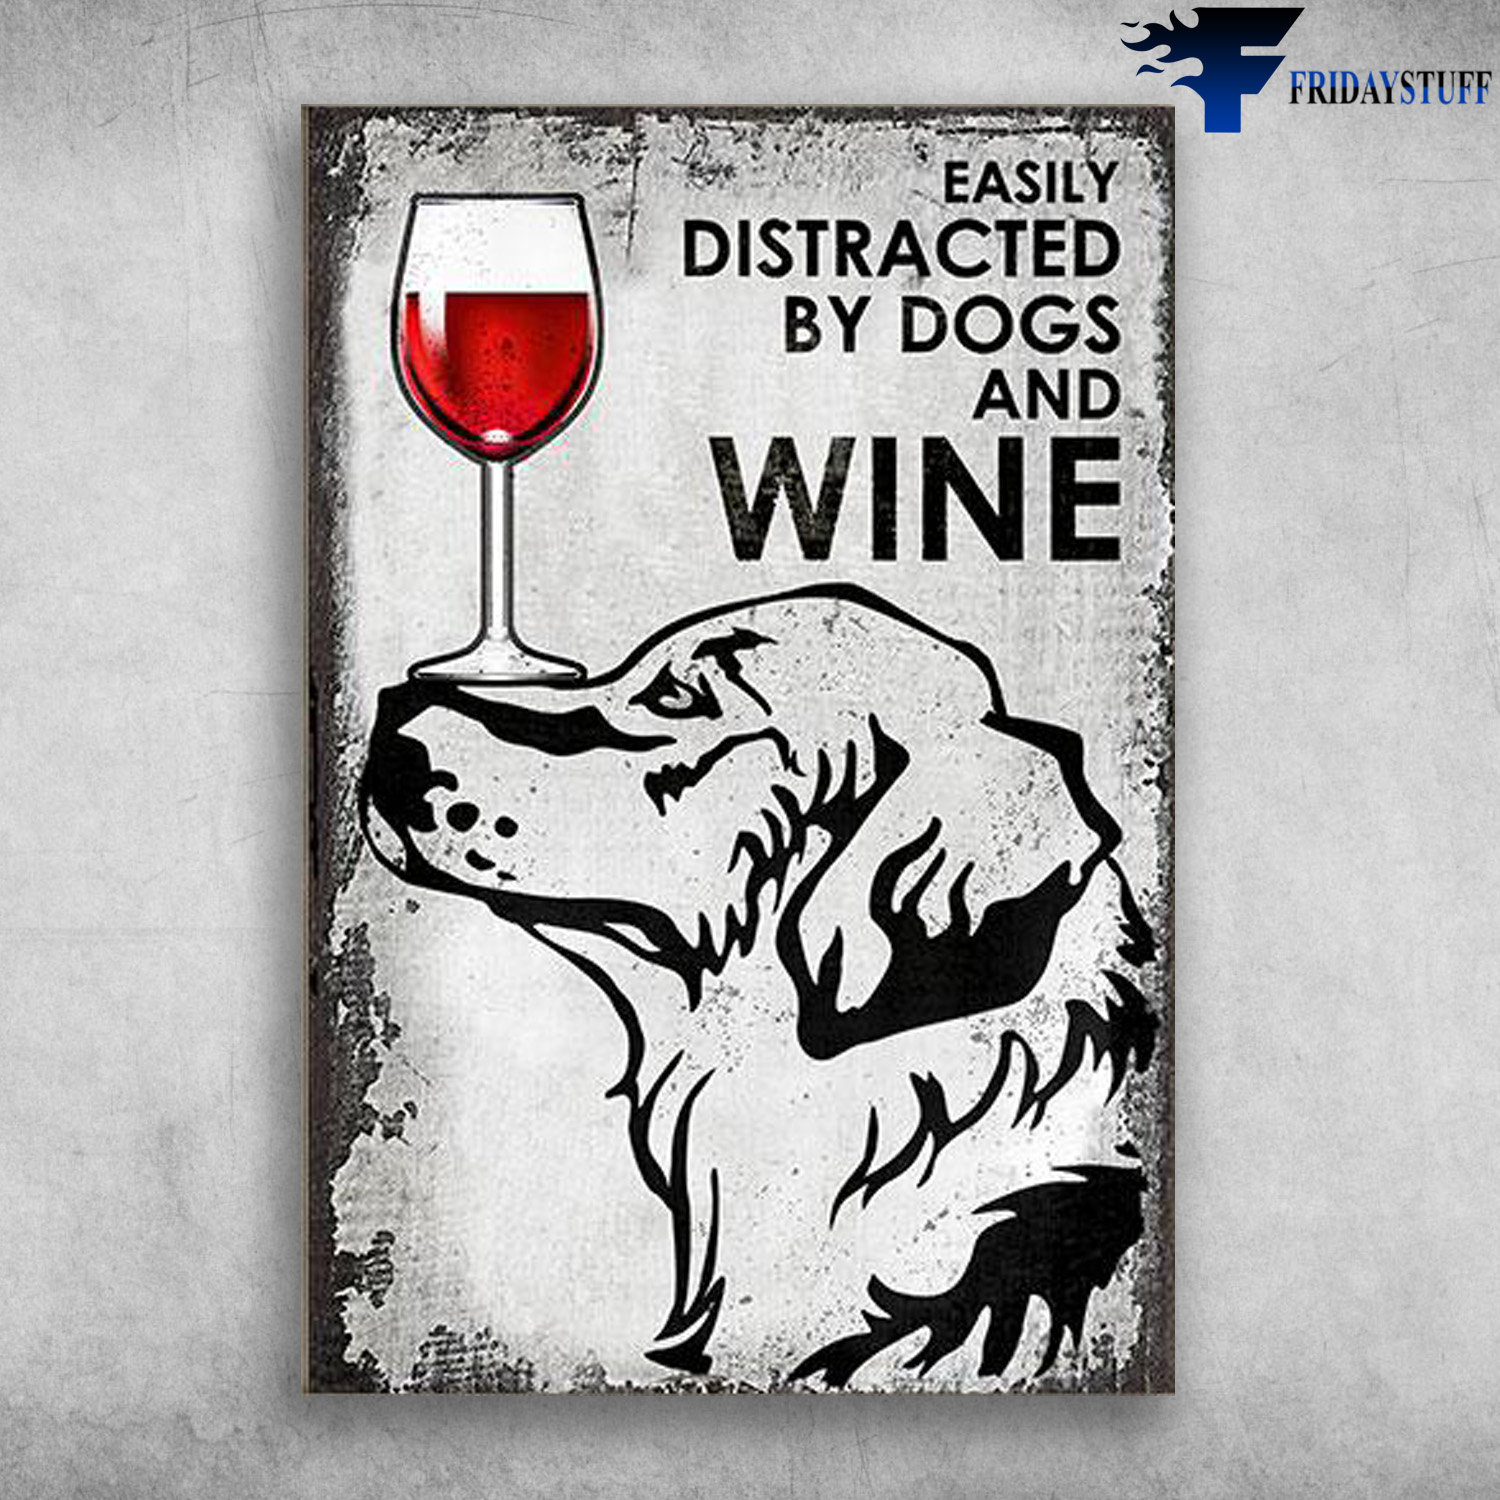 Dog And Wine - Easily Distracted, By Dogs And Wine